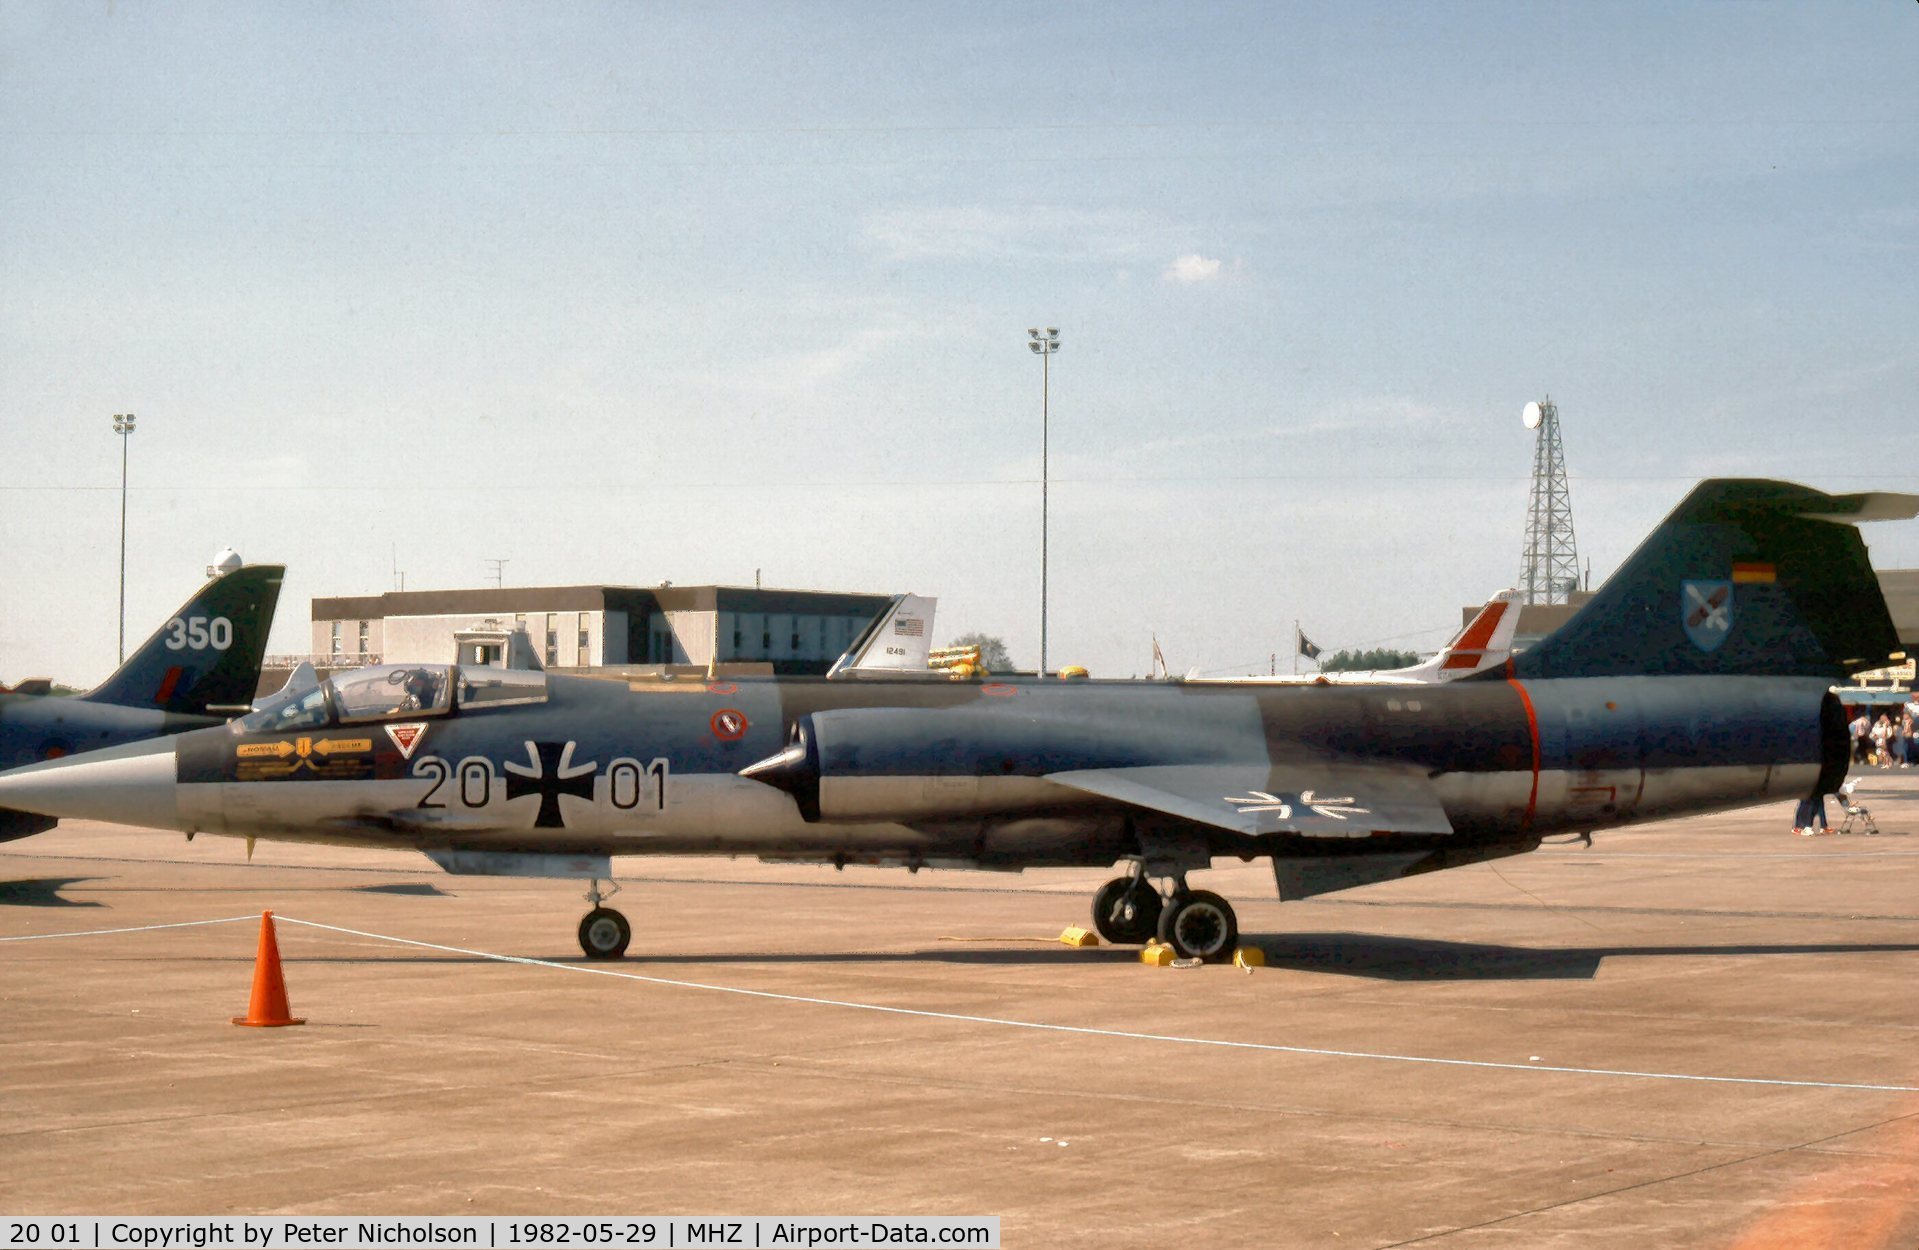 20 01, Lockheed F-104G Starfighter C/N 683-2001, Another view of the JBG-31 Starfighter in the static park at the 1982 RAF Mildenhall Air Fete.